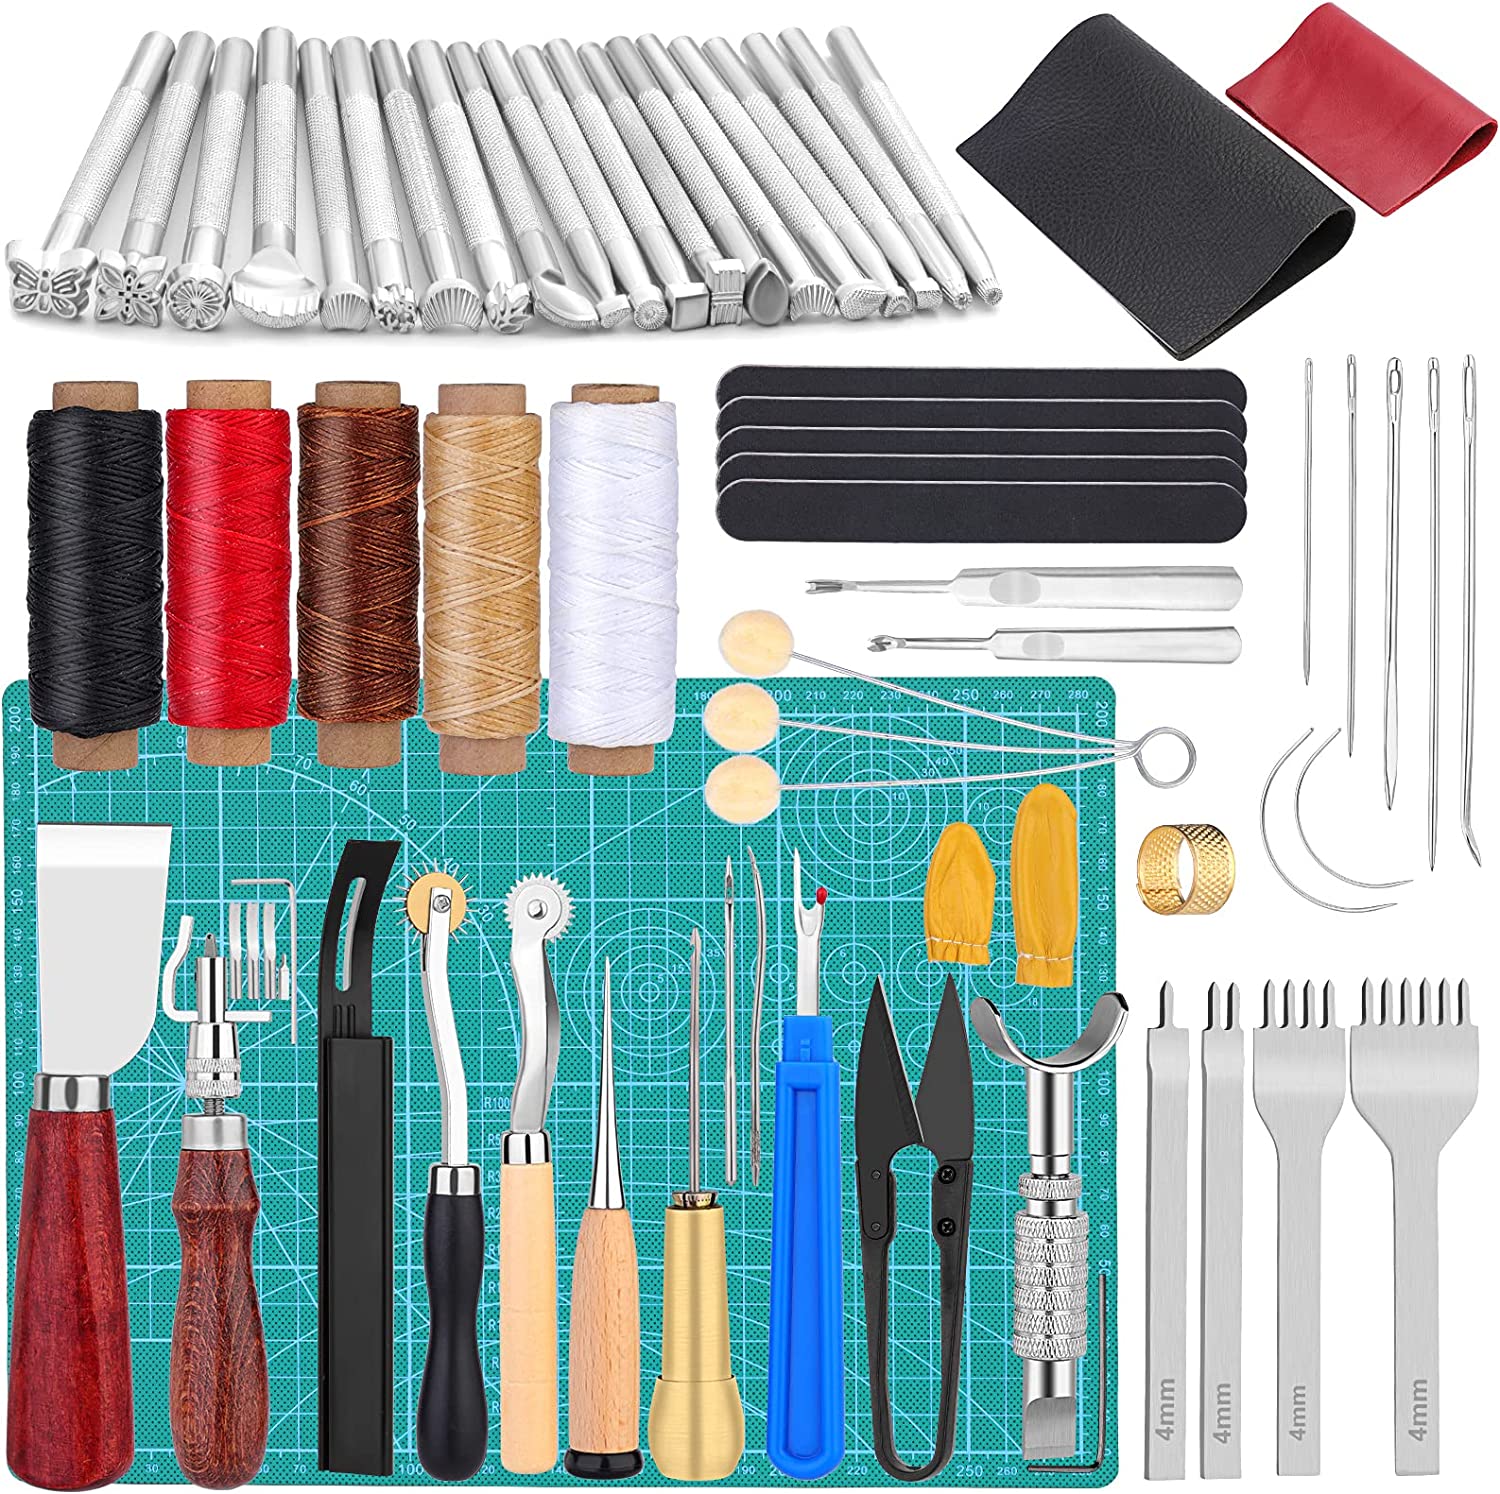  Leather Sewing Kit, 60 pcs Leather Stitching Kit, Heavy Duty  Upholstery Repair Kit, Sewing Kit for Leather, Hand Sewing Needles and  Thread for Leather, Leather Stitching Kit for Beginners